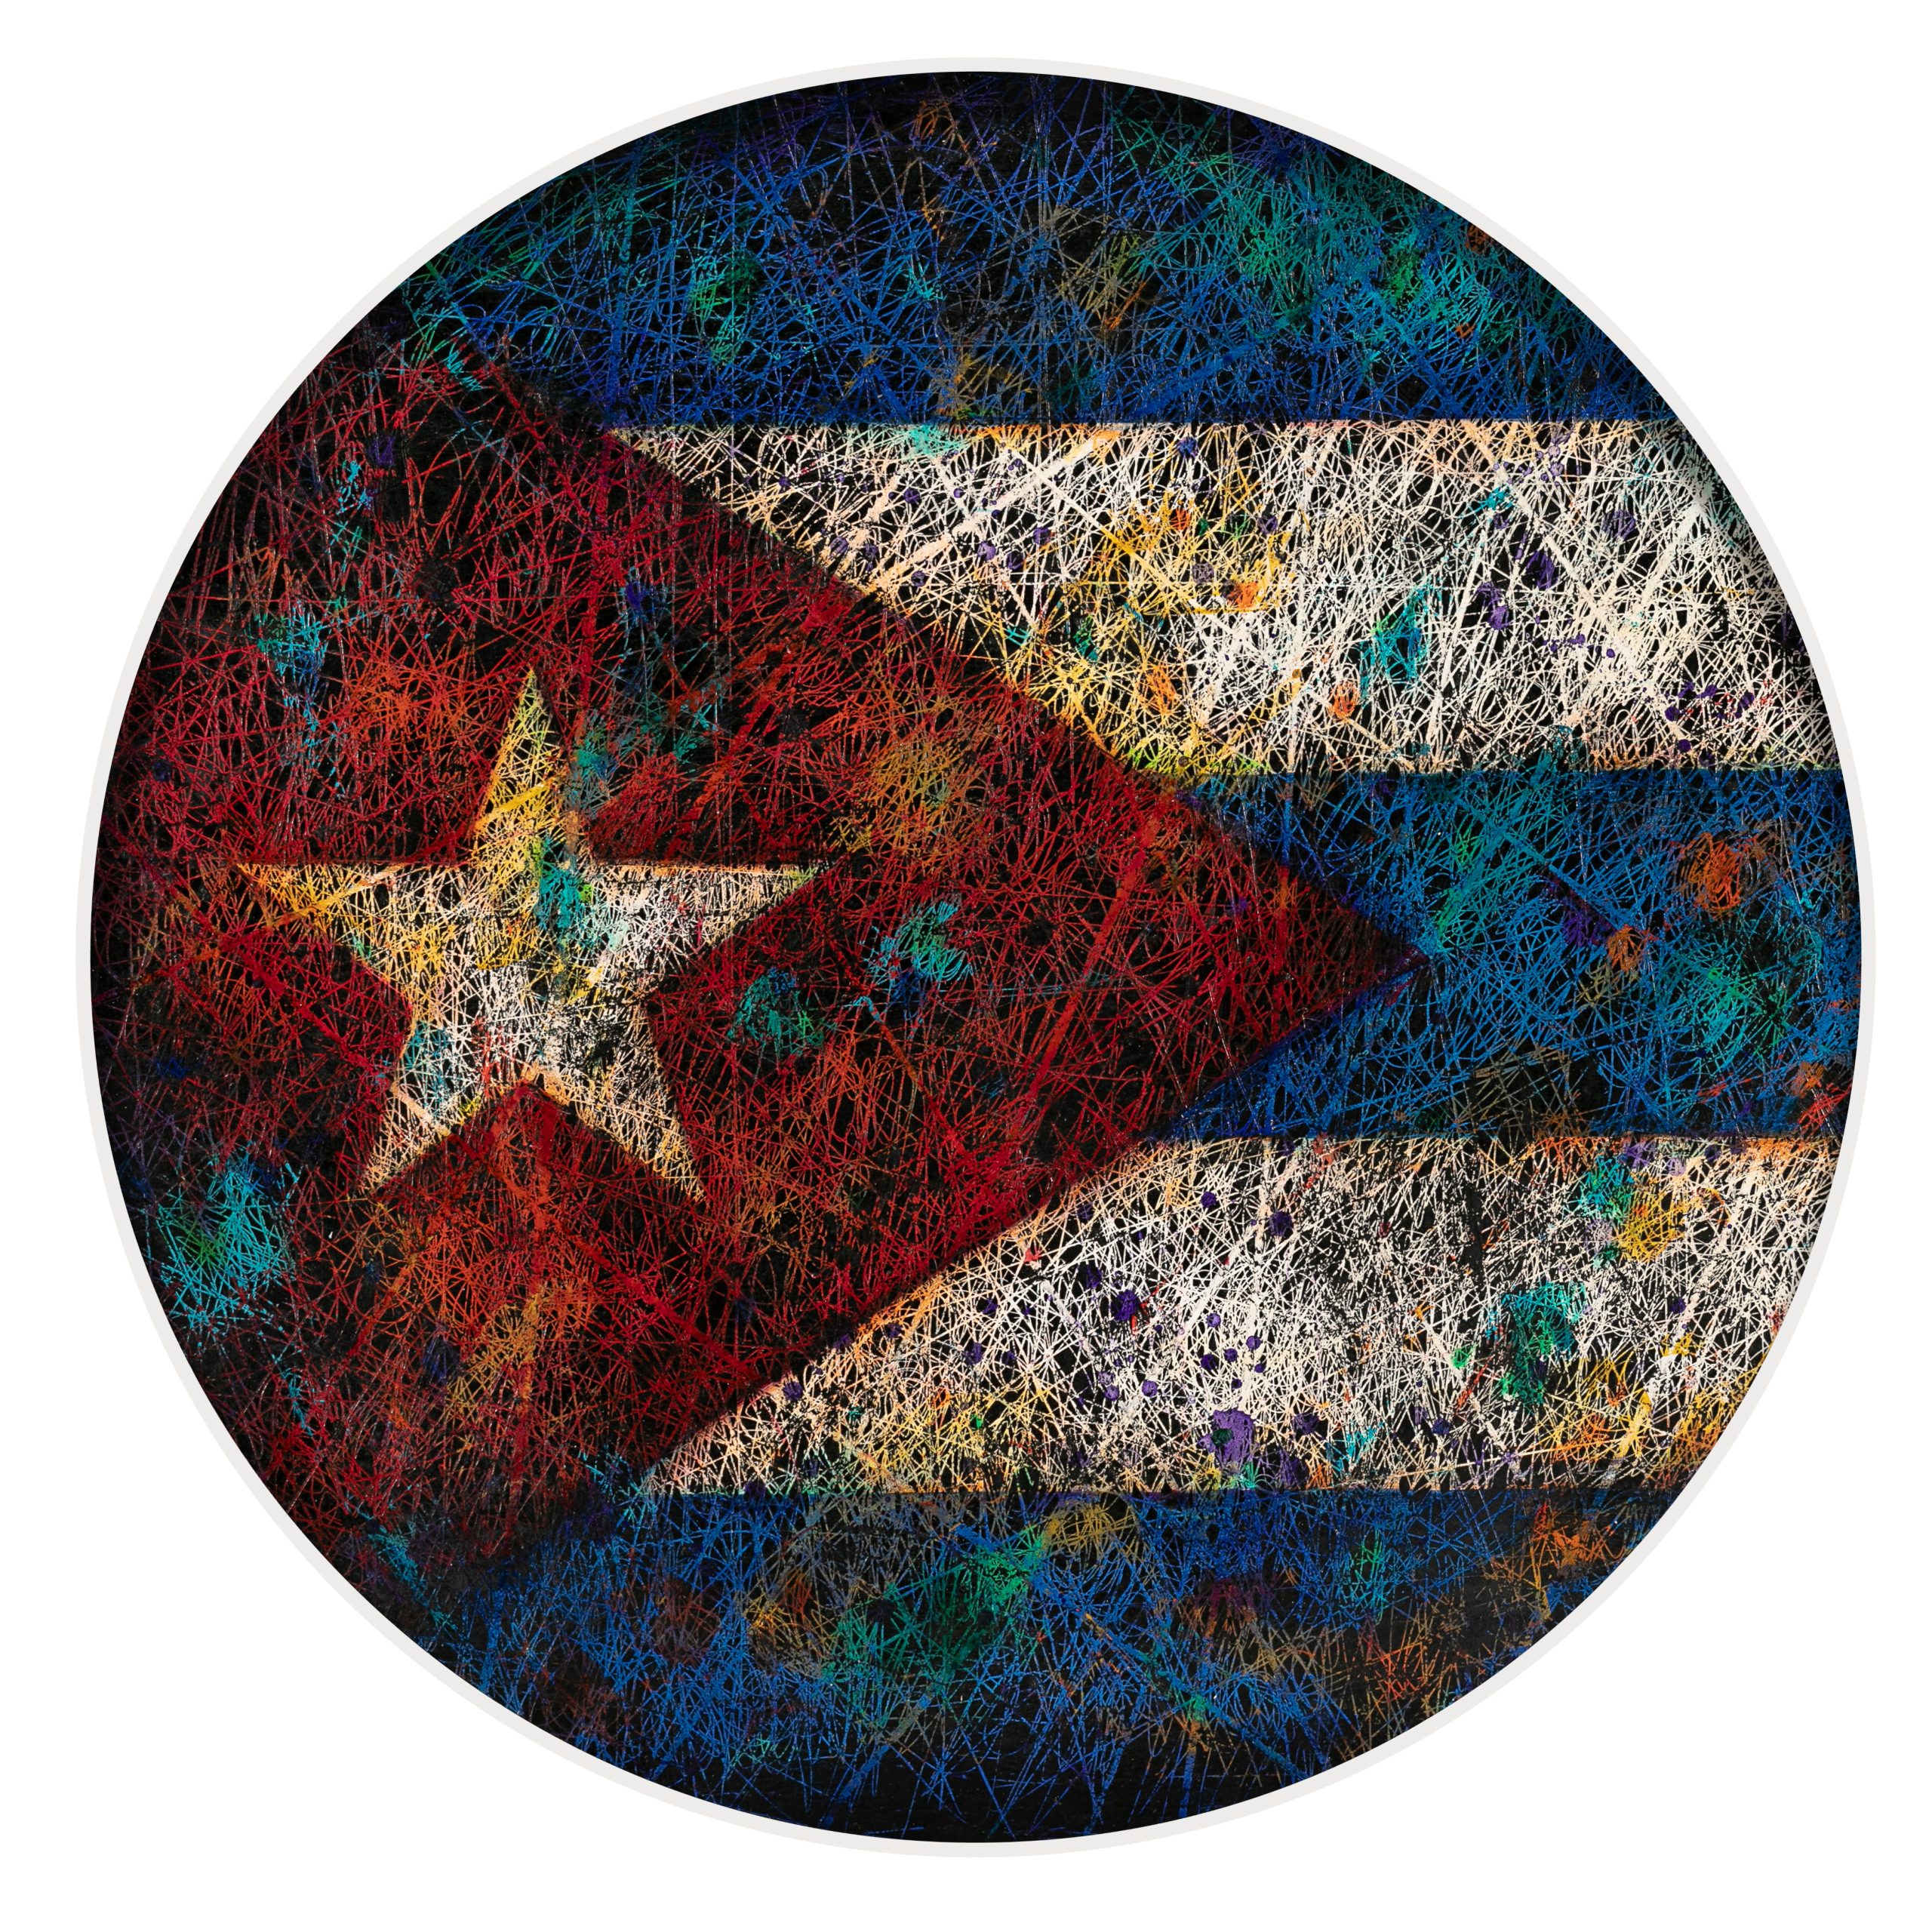 The Flag of Cuba: A Symbol of Revolution, Unity, and Cultural Identity